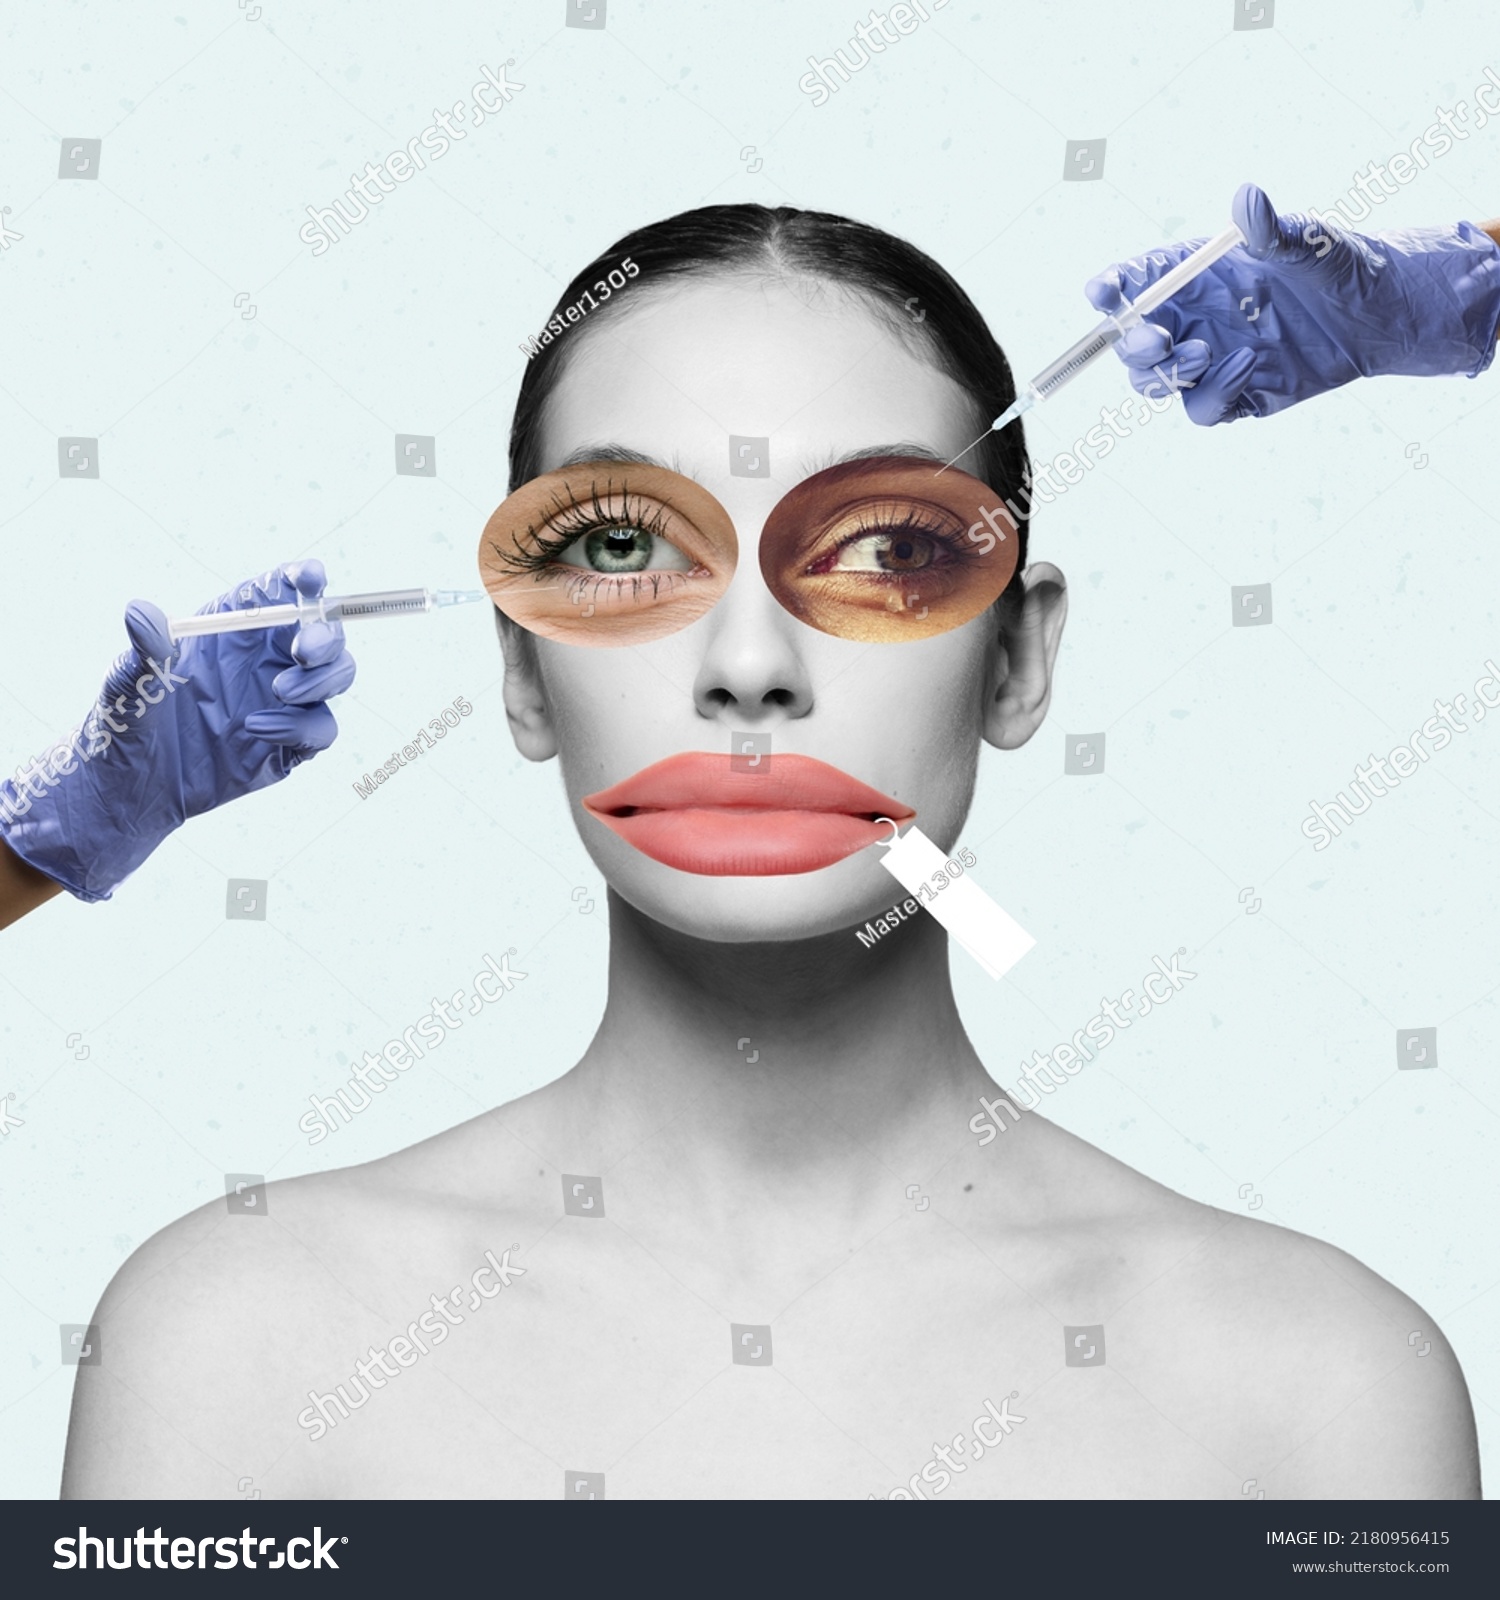 Contemporary art collage. Young woman doing face plastic surgery according to modern beauty standards. Blind trend following. Concept of beauty, plastic surgery, medicine, clinical cosmetology, ad #2180956415